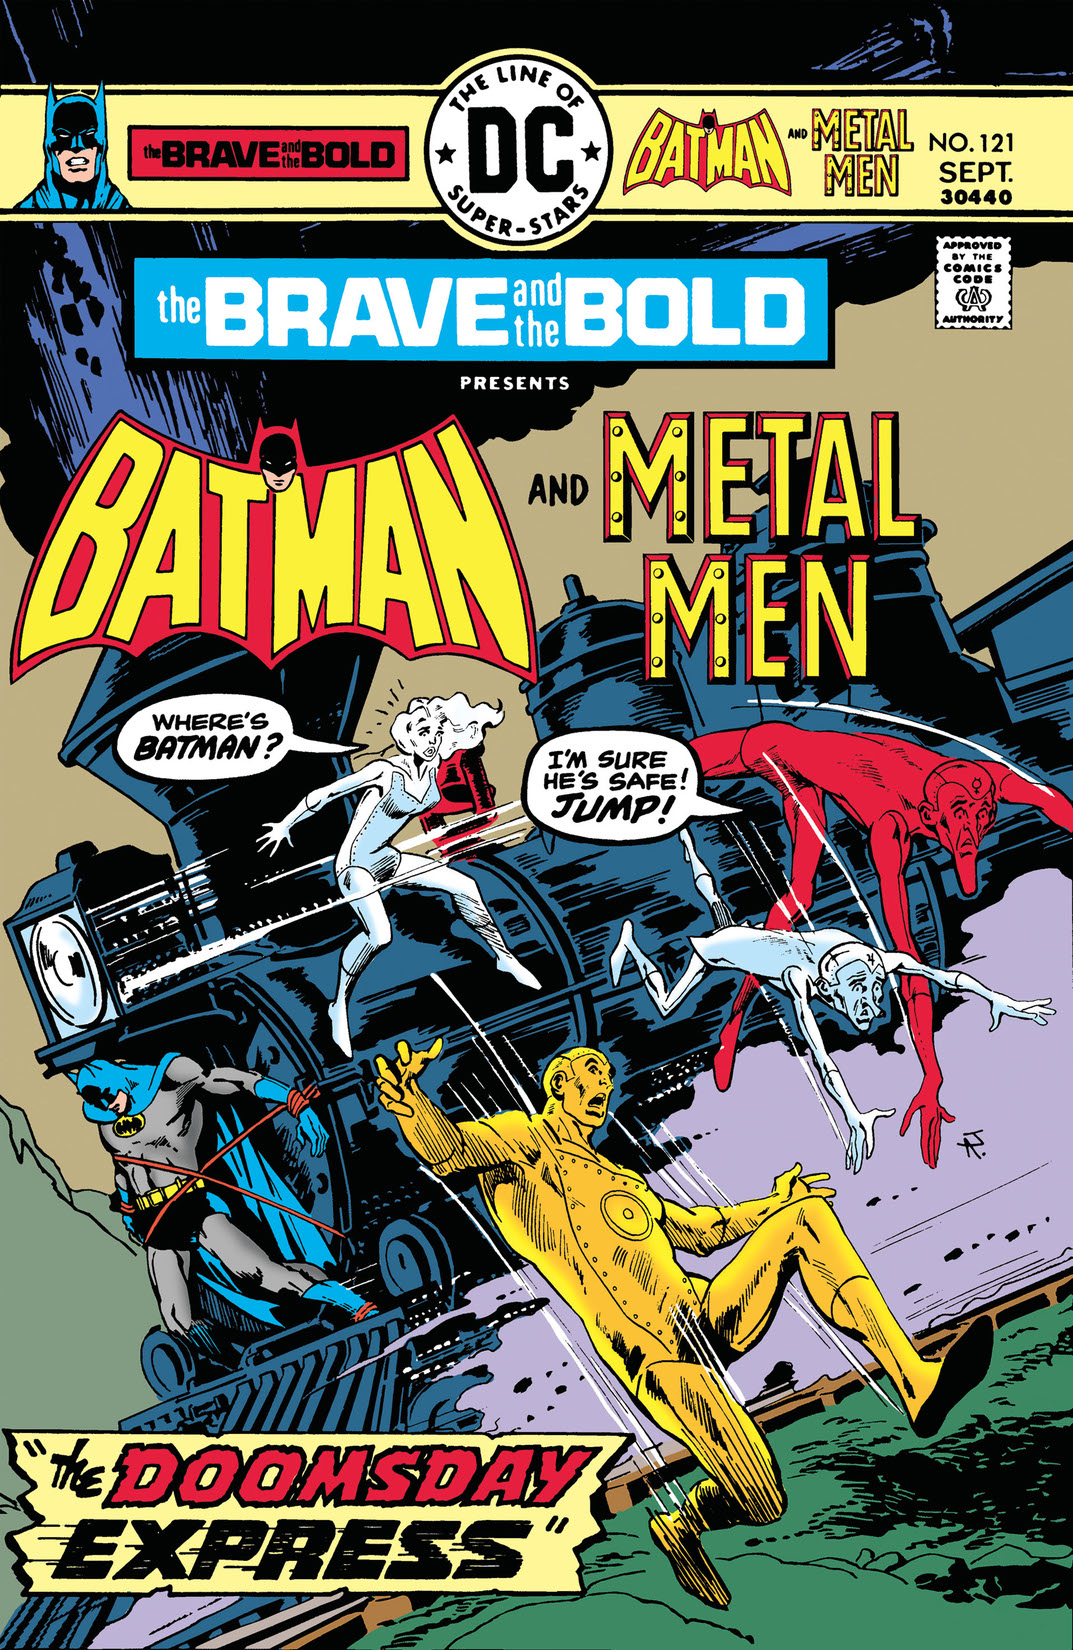 The Brave and the Bold (1955-) #121 preview images